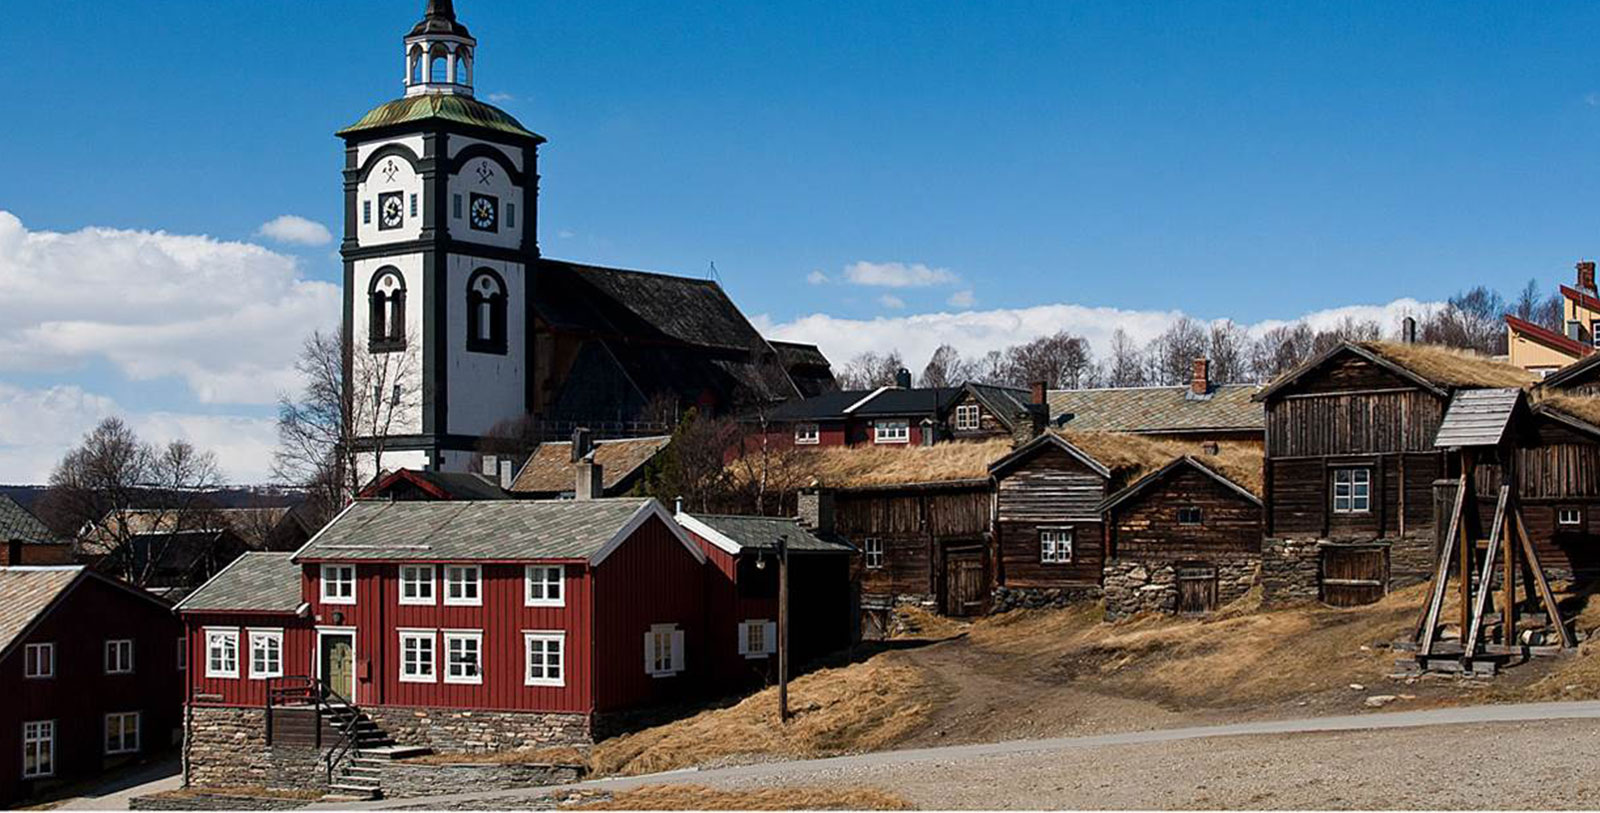 Experience the Røros church, one of the Norway's largest churches with 1600 seats.